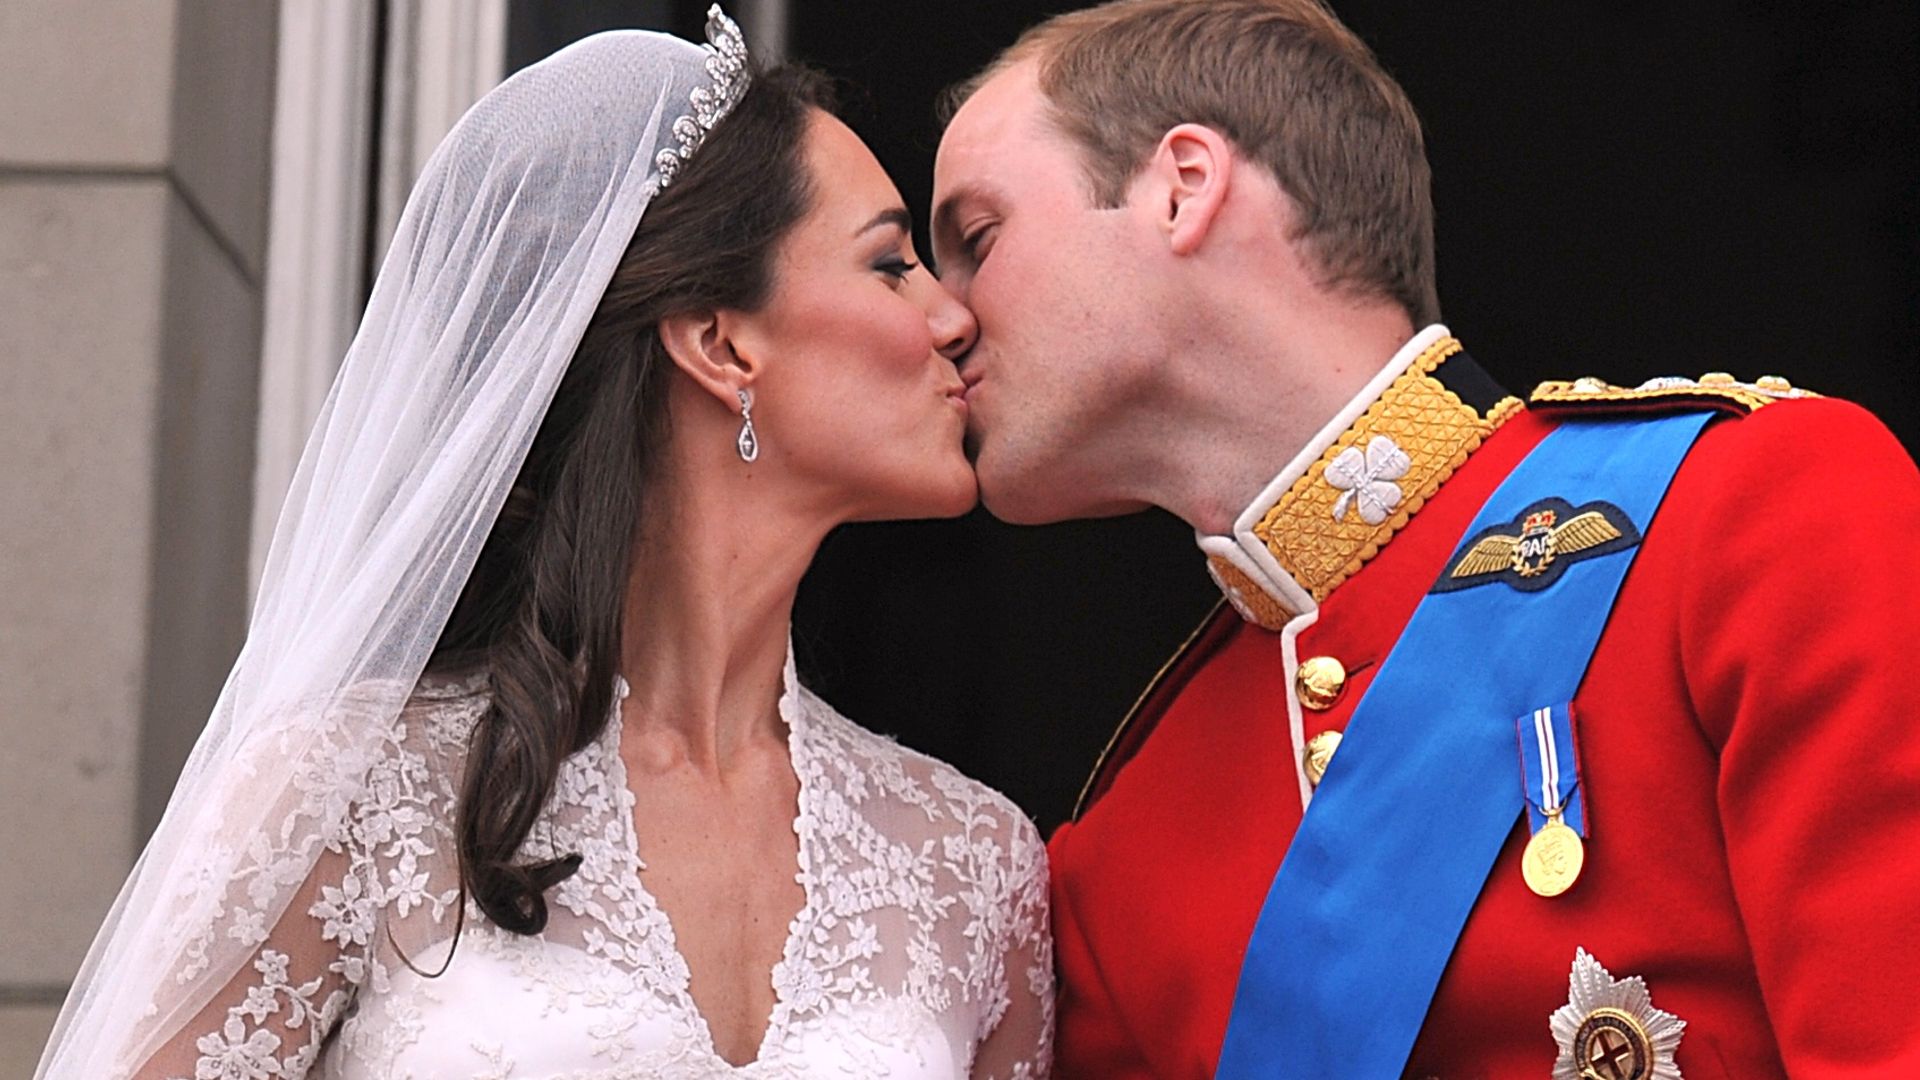 William kissed his royal bride Kate twice on the Buckingham Palace balcony